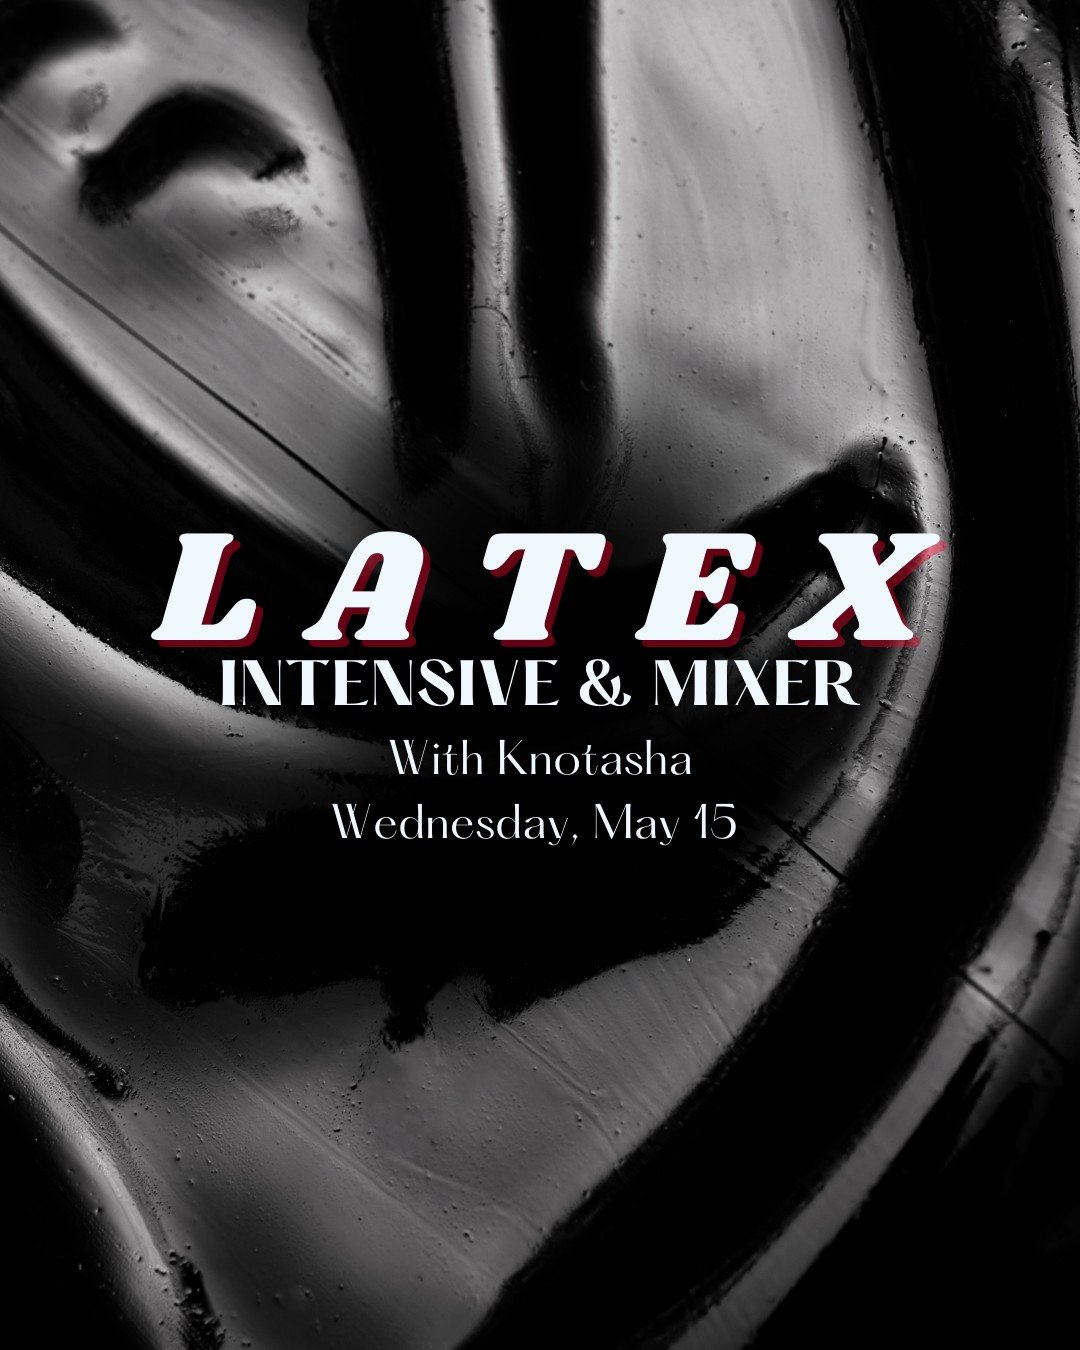 Whether you're a seasoned f3tishist, a budding rubber enthusiast, or a curious k!nkster, join @knotashanyc  for a latex intensive followed by a f3tish wear mixer! Head to the link in our bio for tickest.

UPCOMING EVENTS
📅 May 9: HMU Academy: Trauma